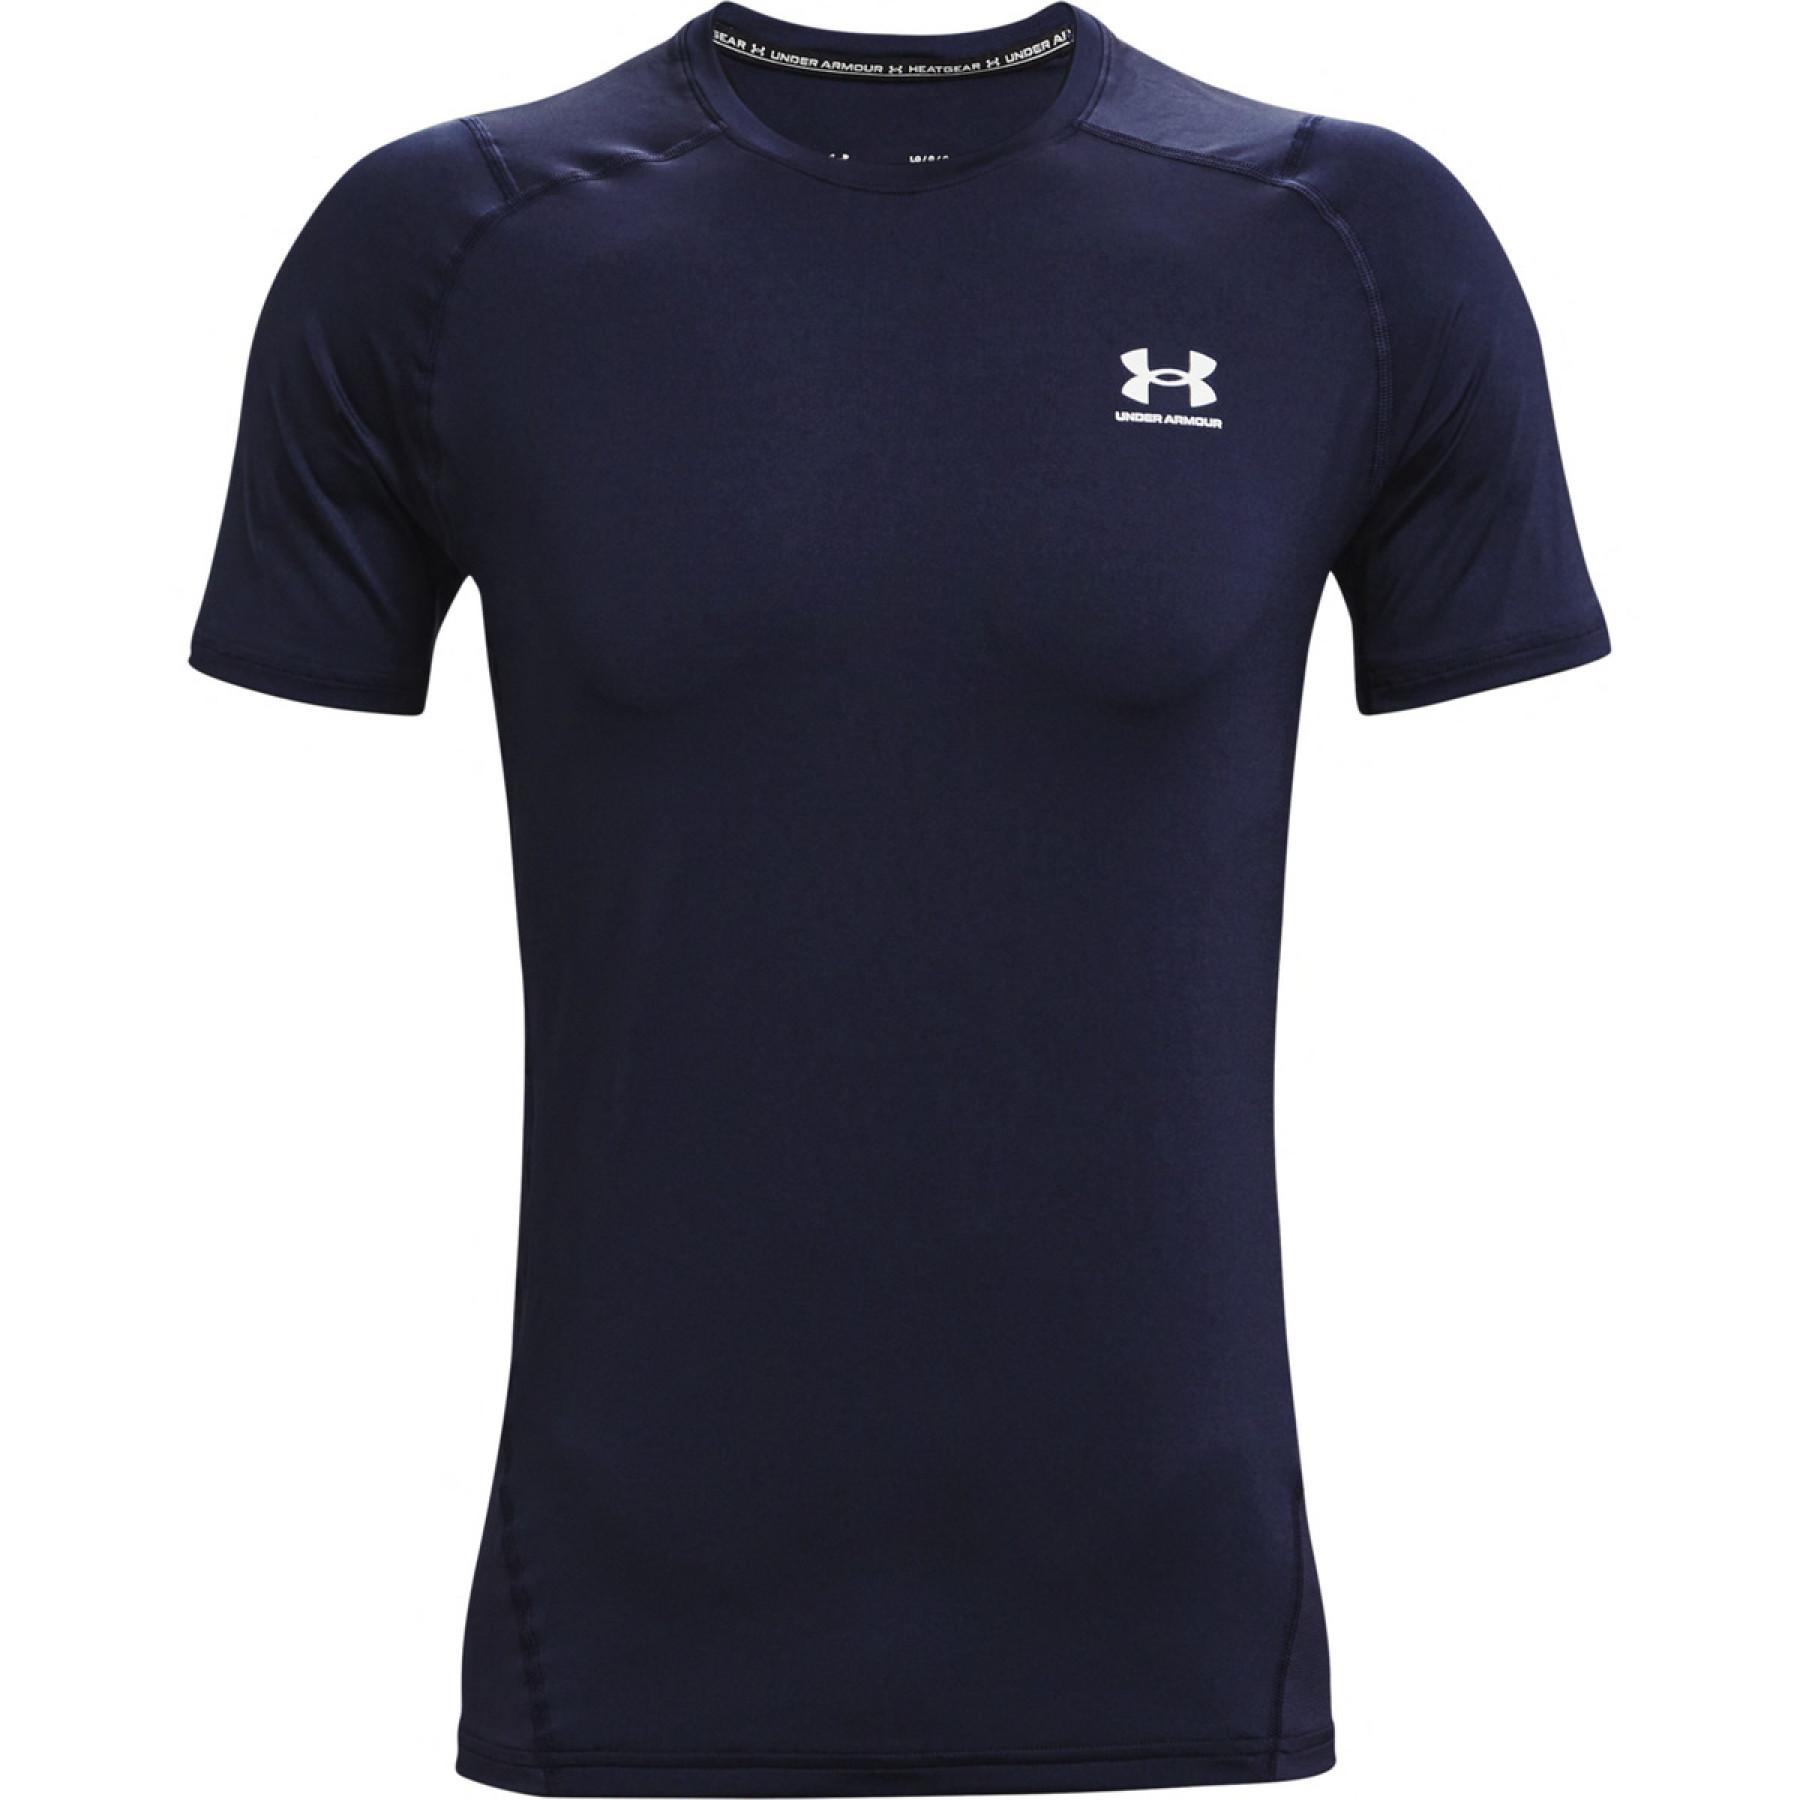 Heatgear fitted jersey Under Armour